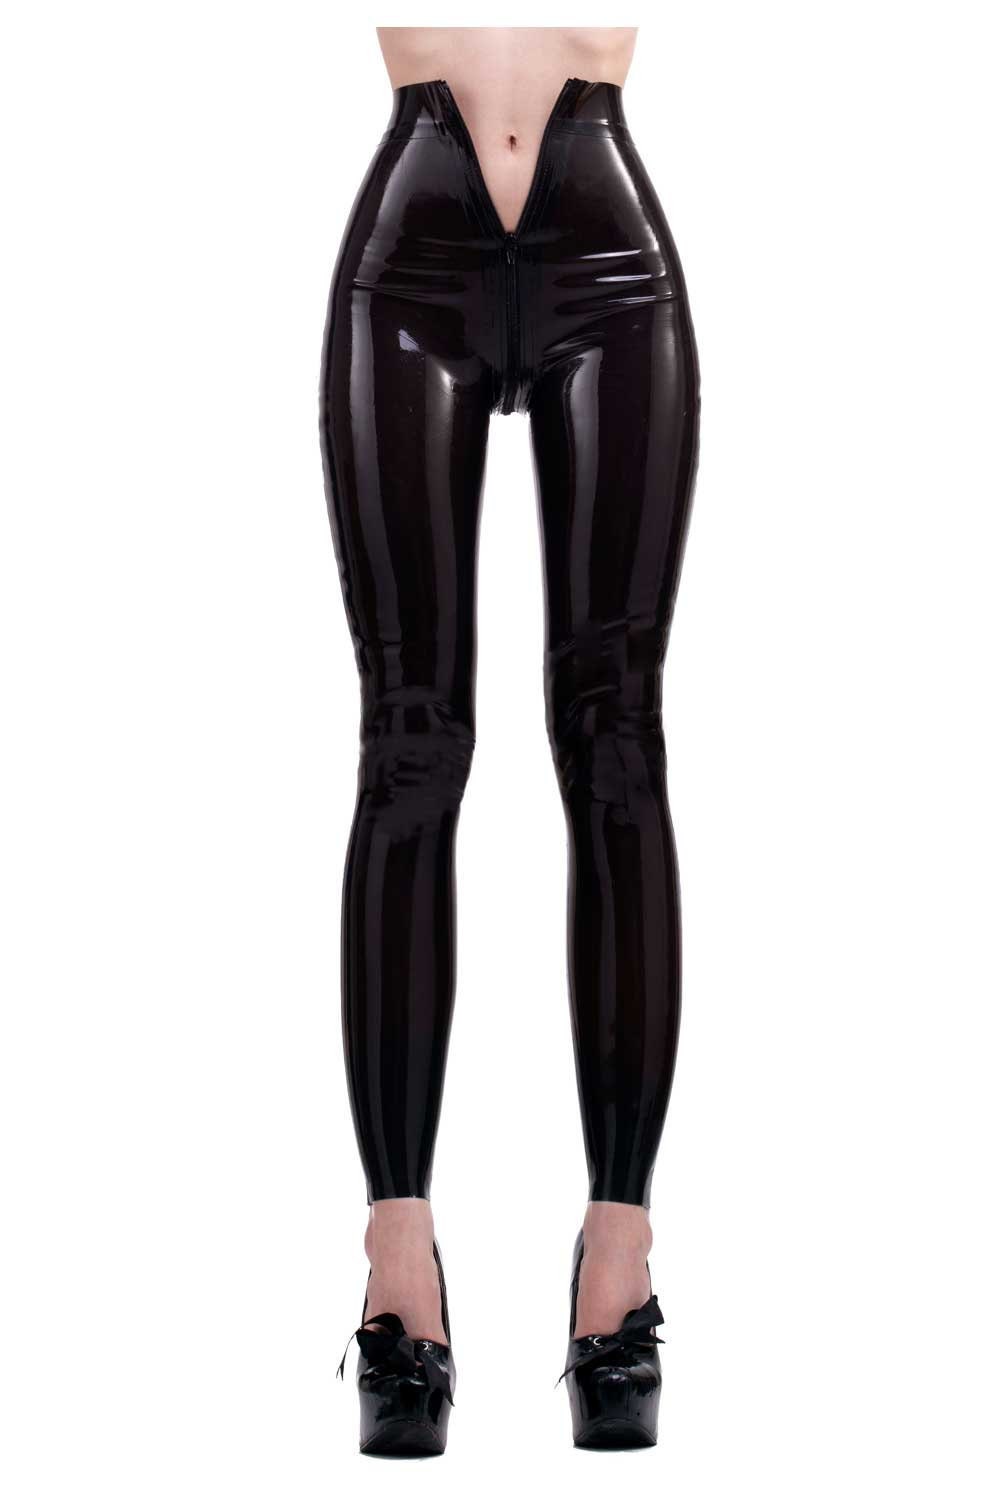 Latex Clothing Black Knee Length Leggings in Black or Any Other Plain  Colors. 